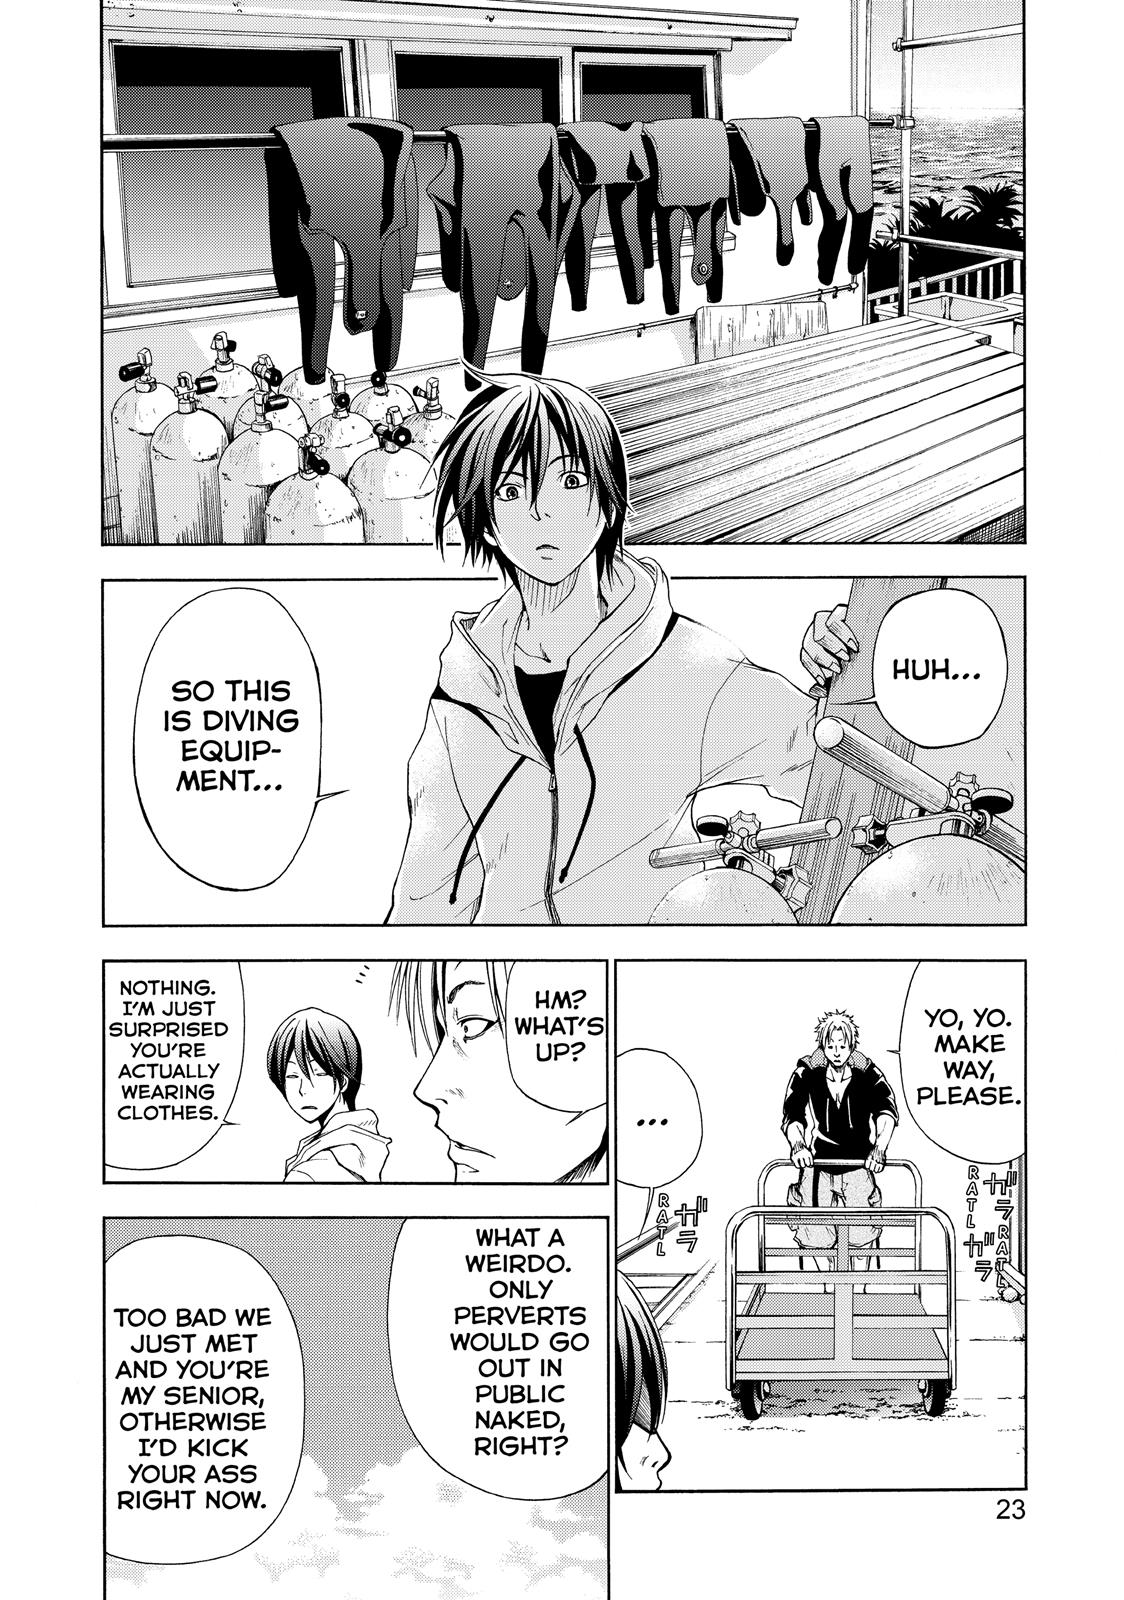 Grand Blue, Chapter 1 image 23